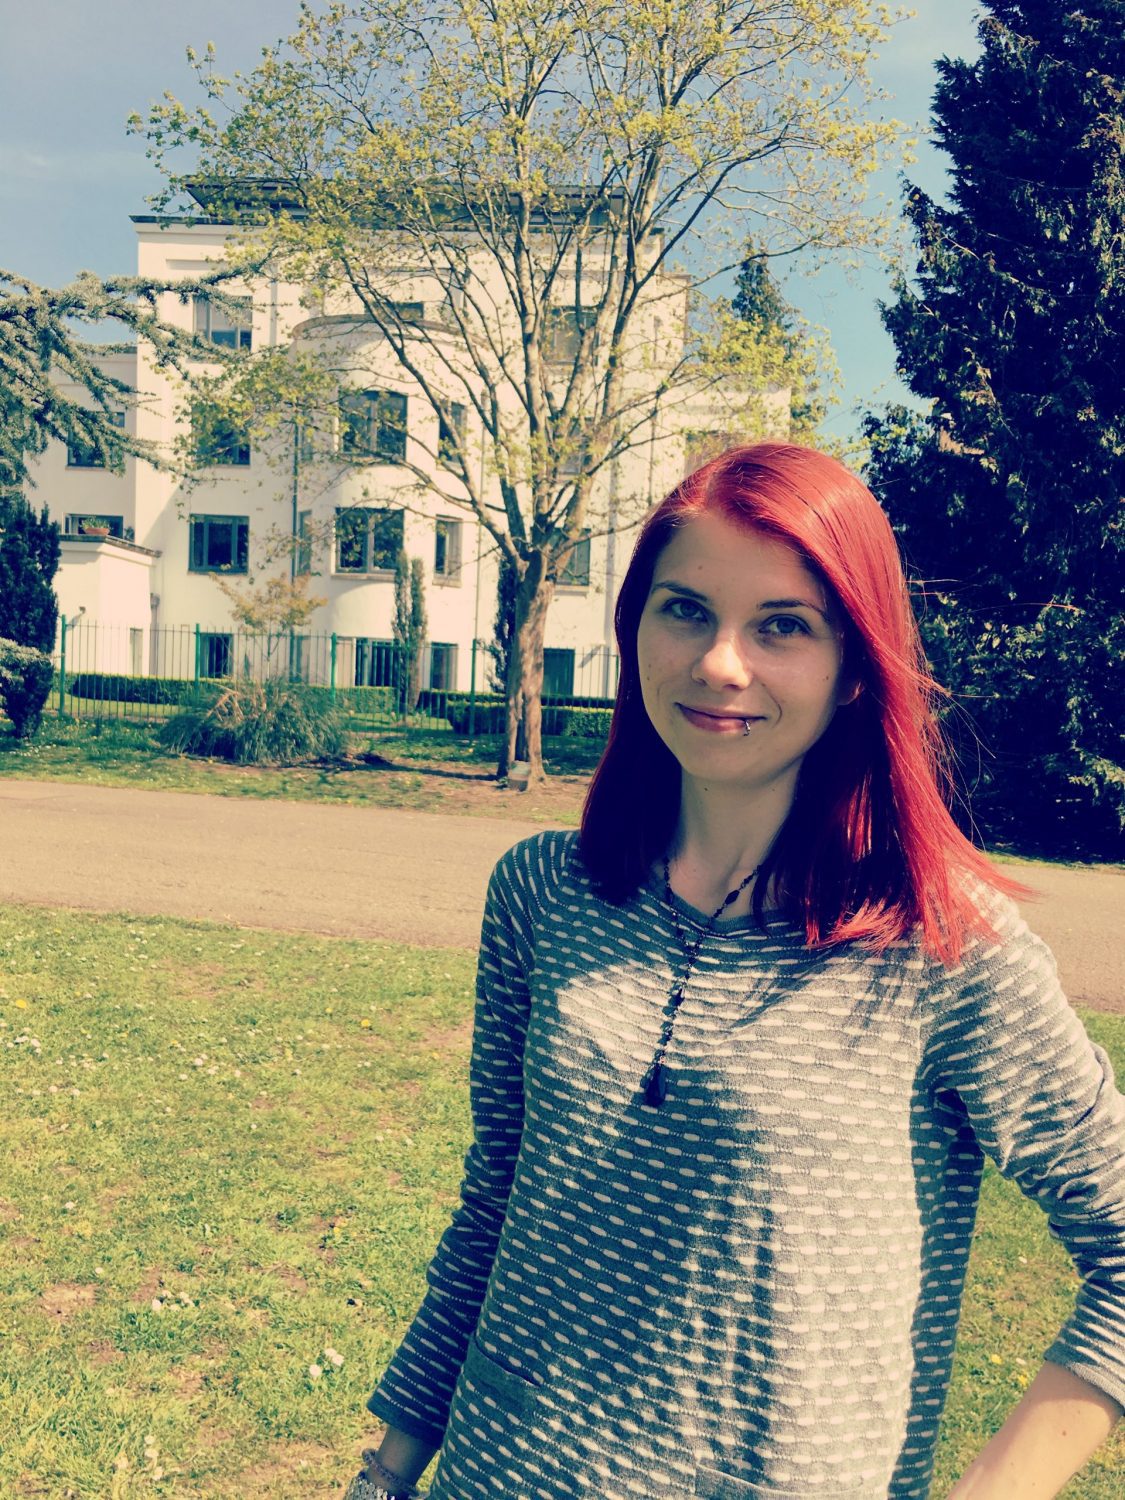 Caz (Young, white woman with red hair) smiling while standing in the park during a sunny day.